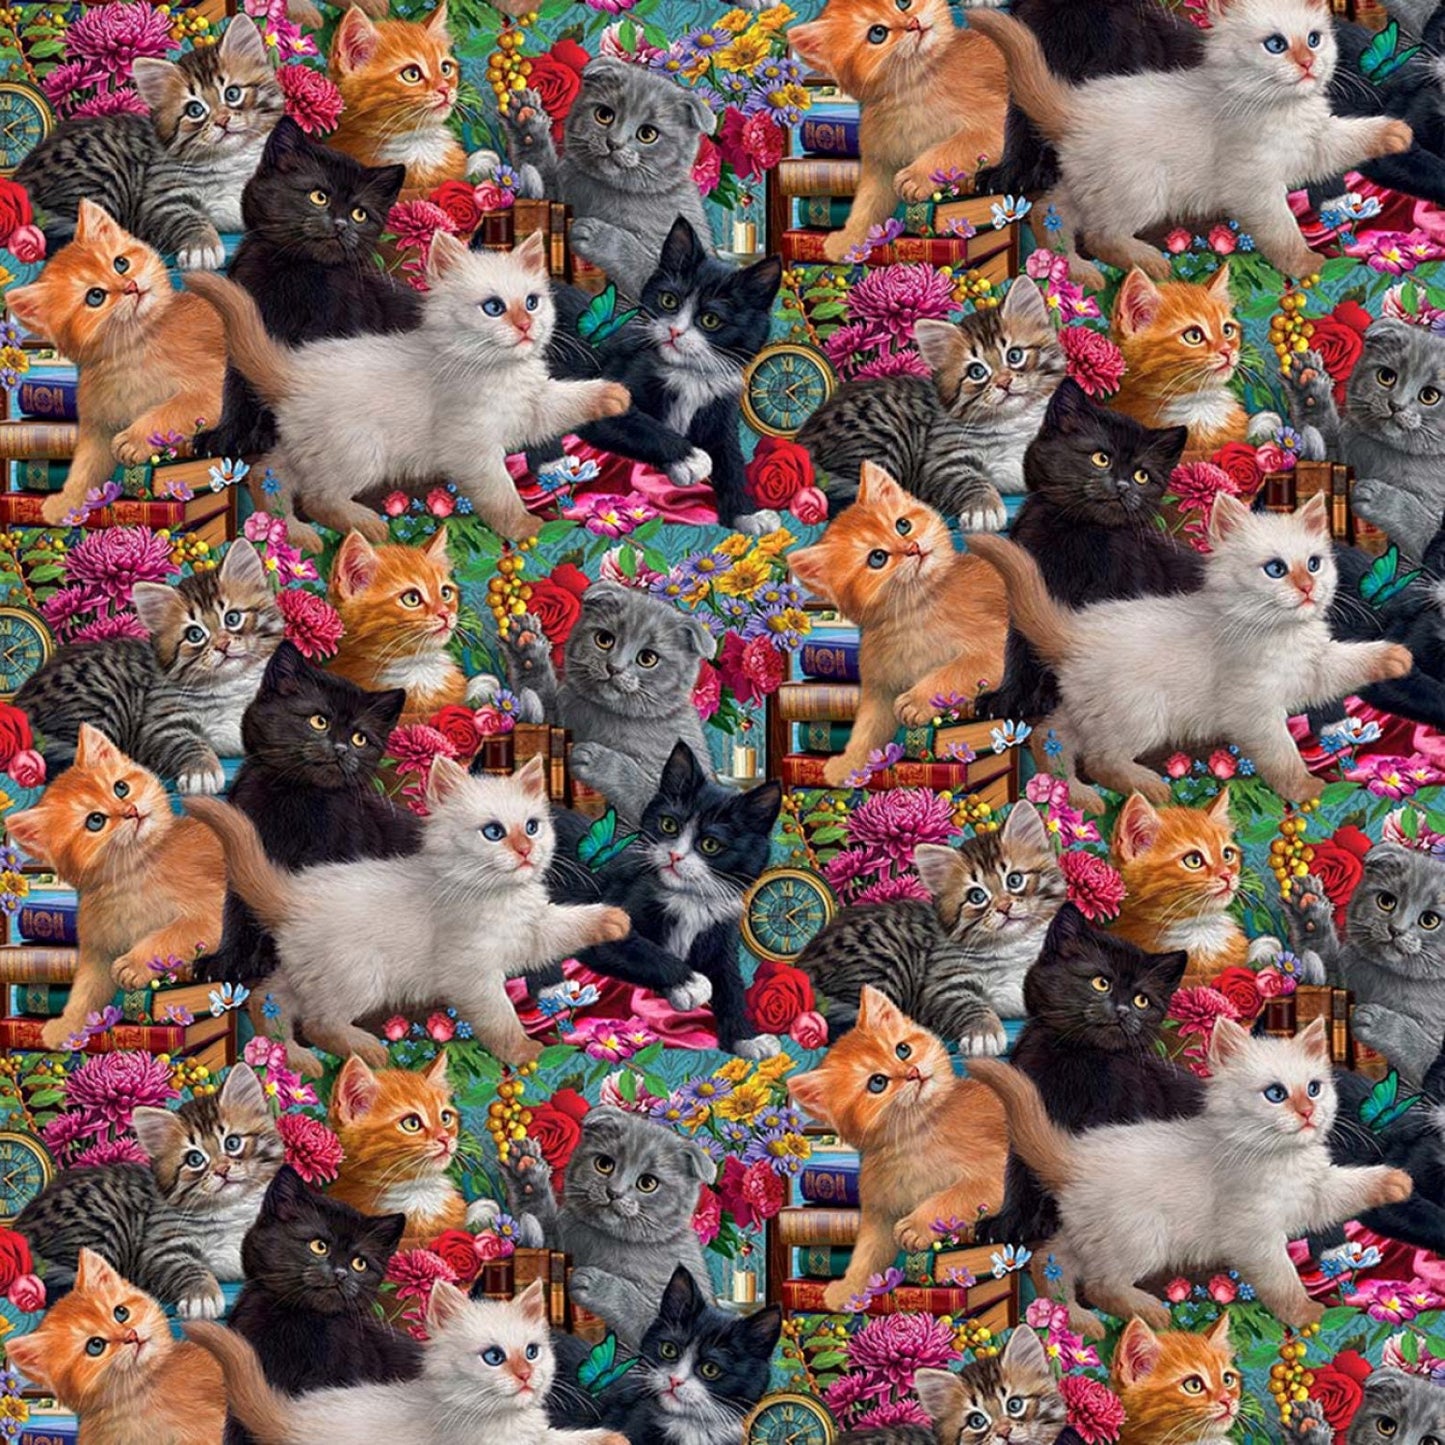 Madame Victoria's Elegant Cats Packed Kittens 10264-X Cotton Woven Fabric